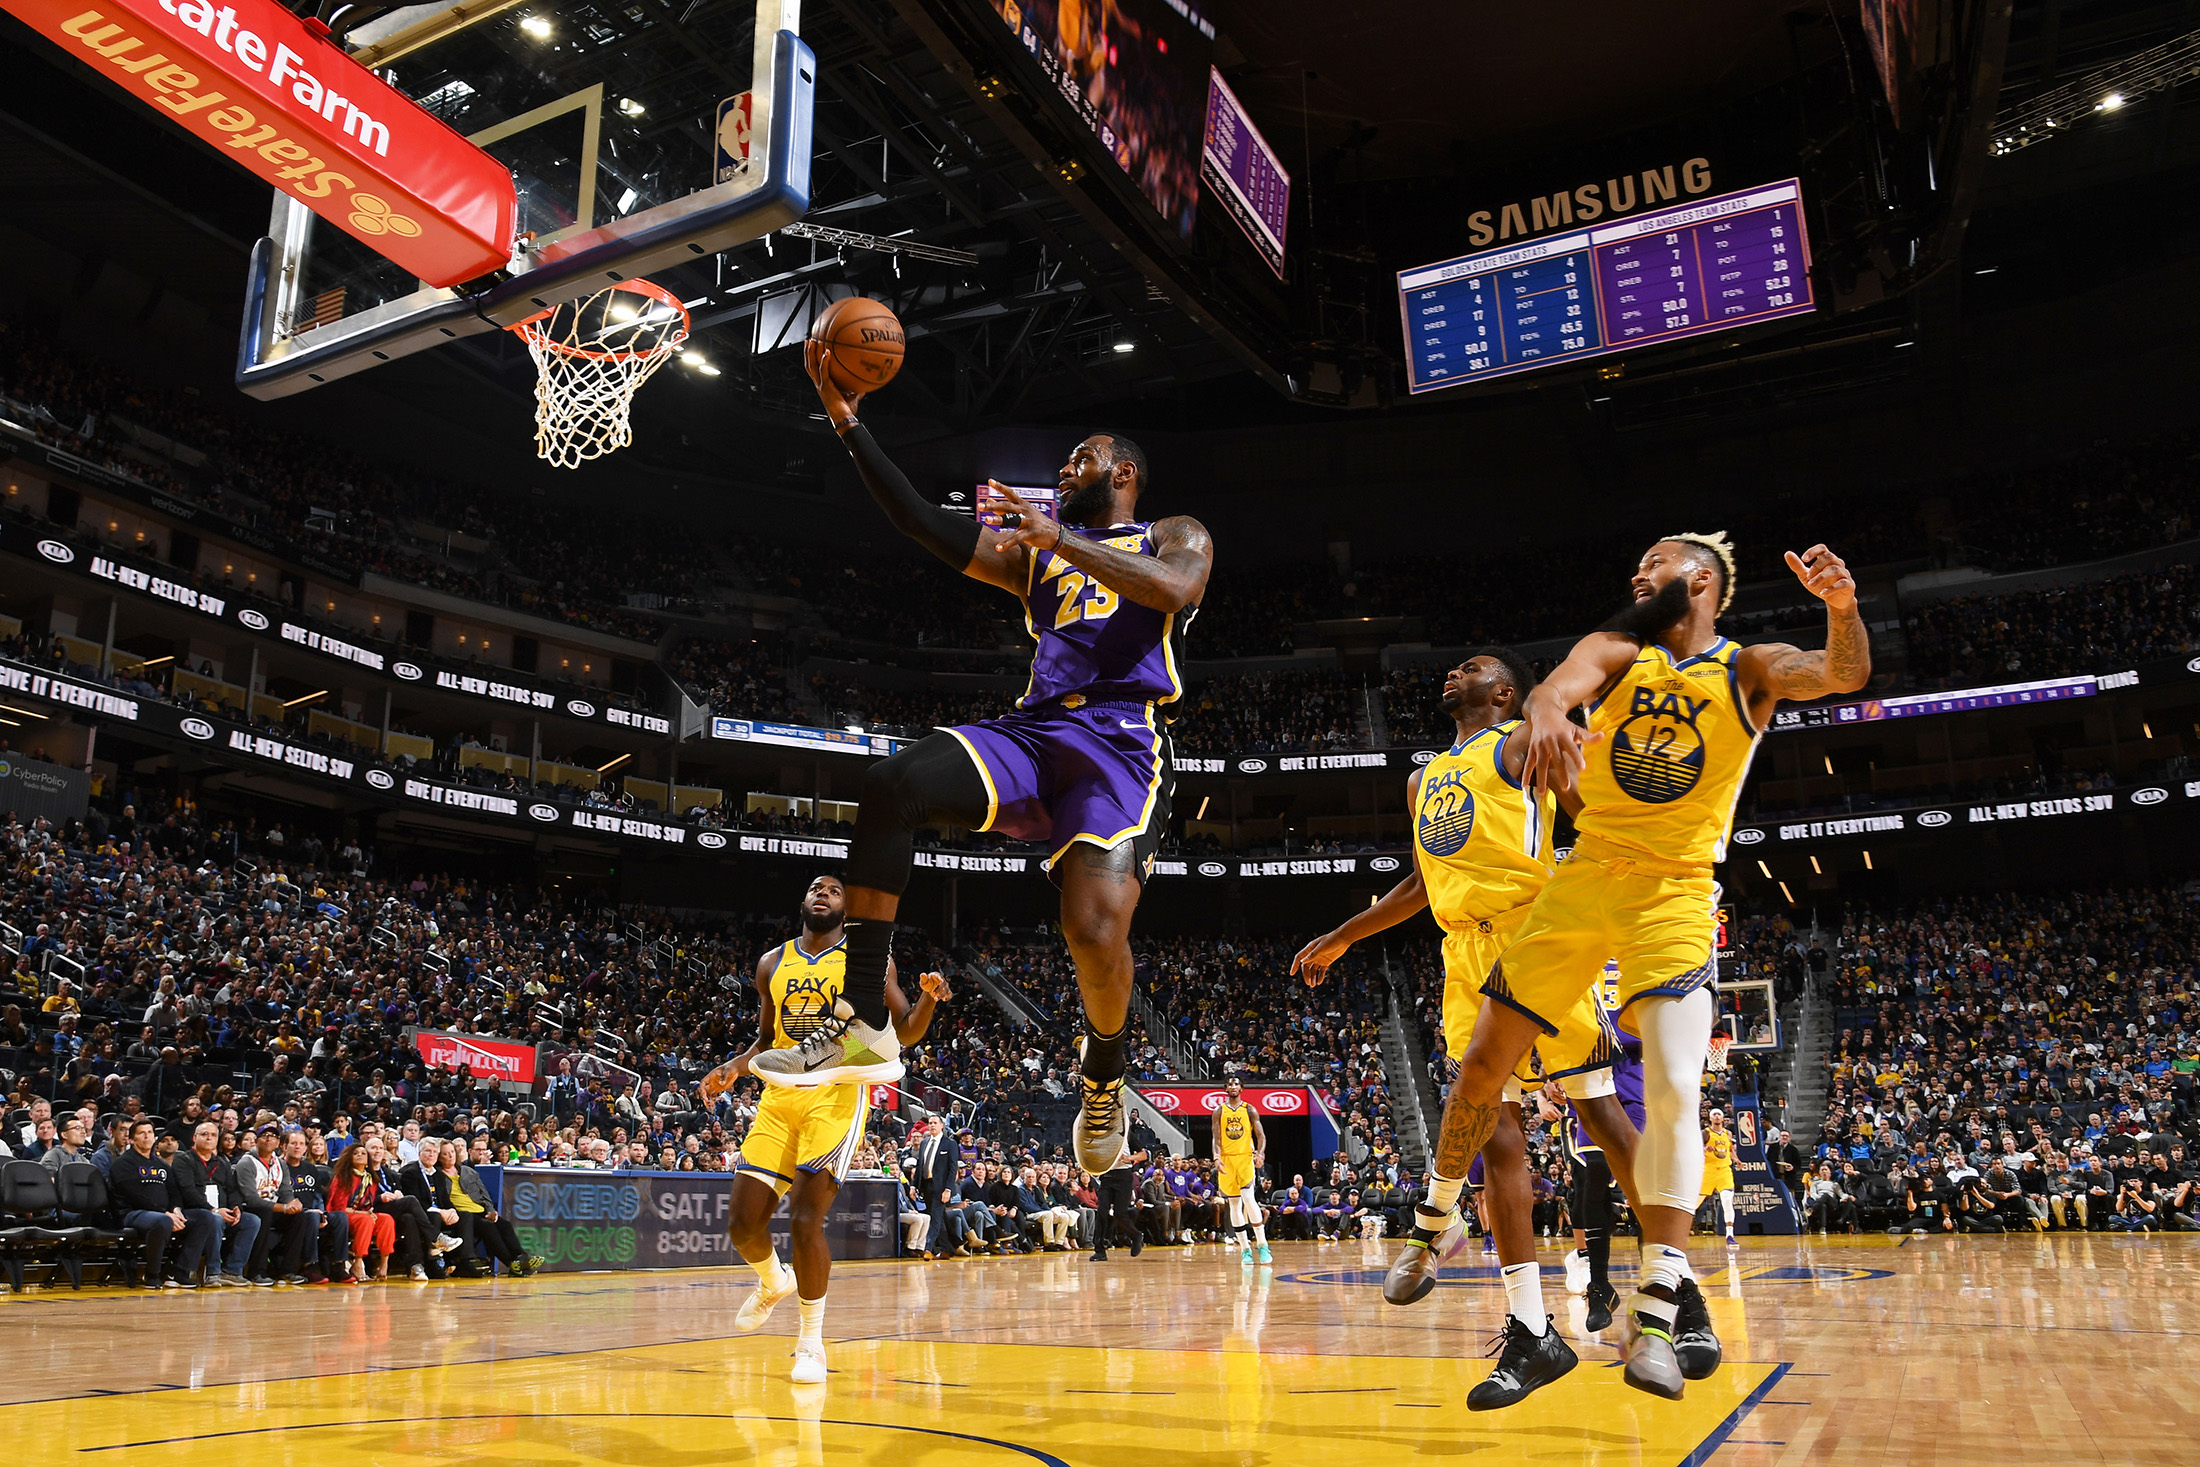 LeBron James: Lakers debut features dunks, highlights team's weakness